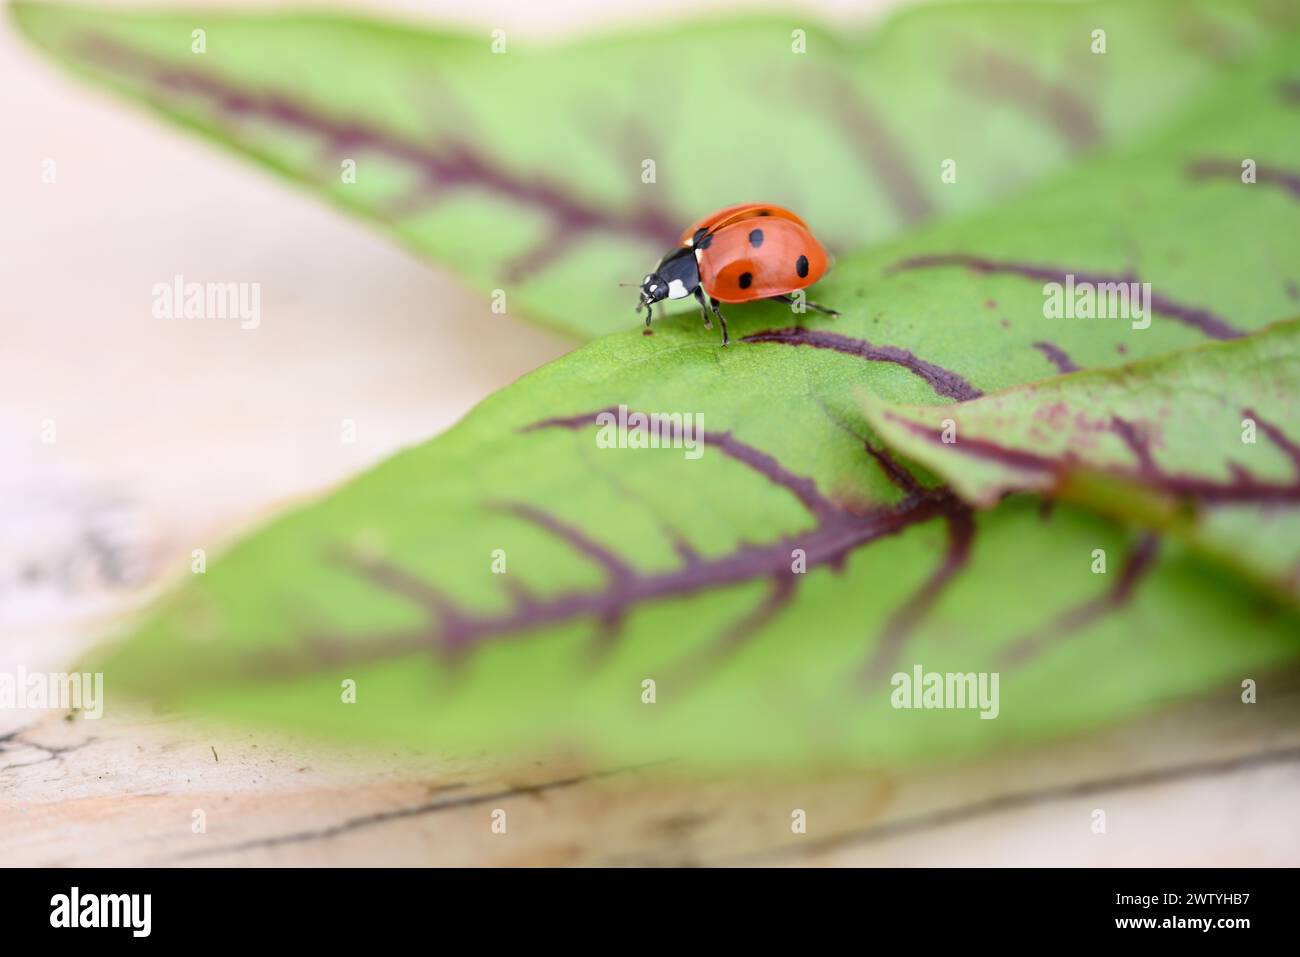 An arthropod insect known as a ladybug is perched on a green leaf. Ladybugs are beneficial organisms that help control pests like red bugs Stock Photo